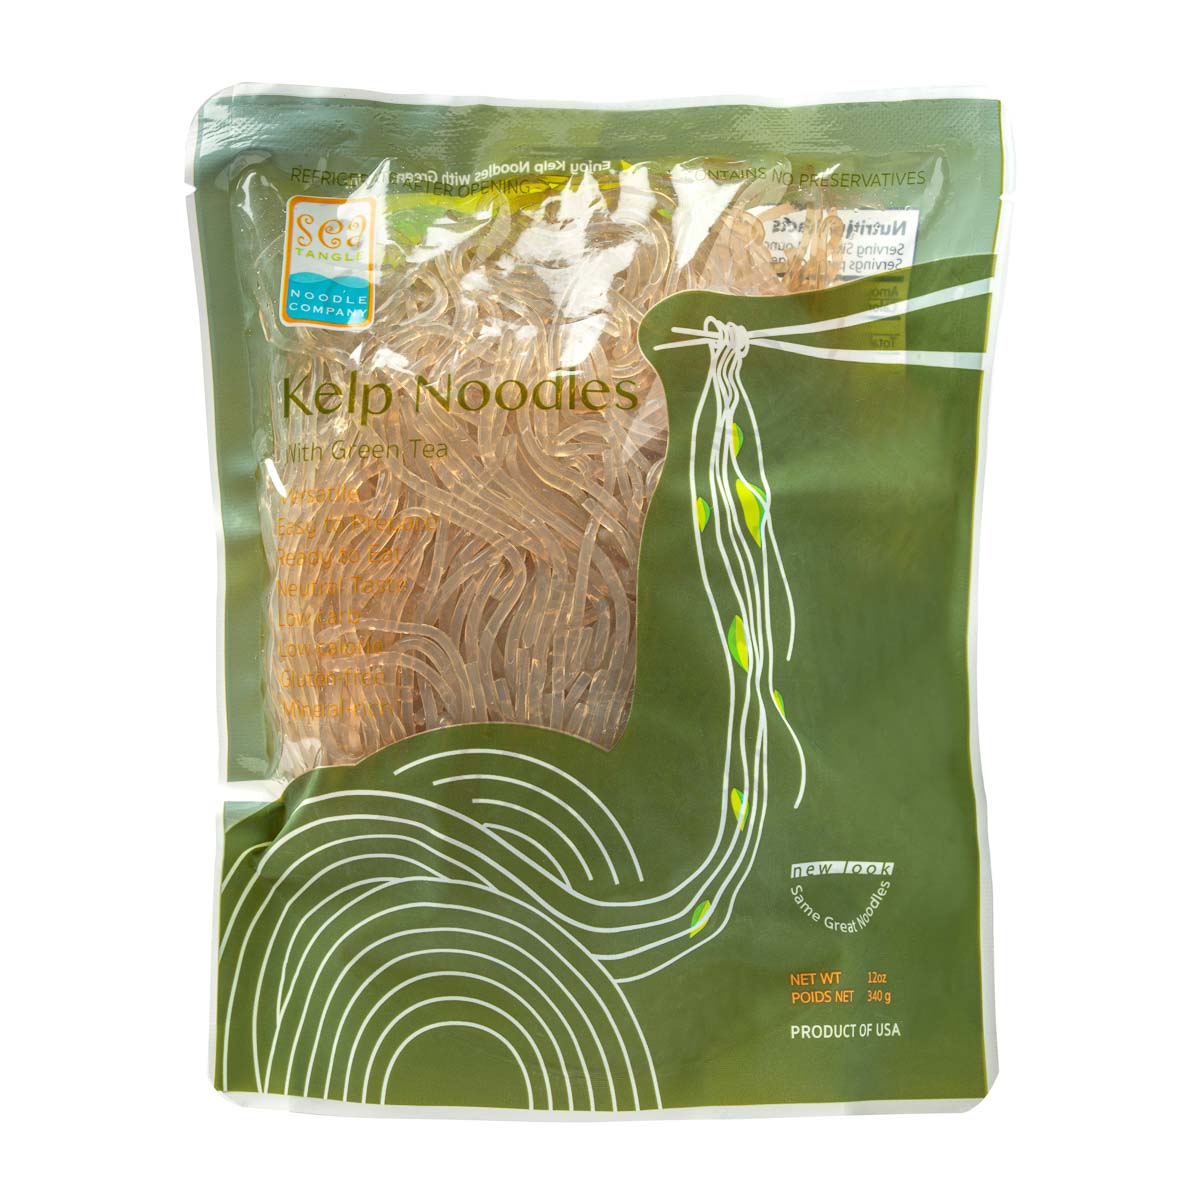 Kelp Noodles with Green Tea | Sea Tangle | Raw Living UK | Sea Vegetables | Sea Tangle Kelp Noodles with Green Tea look and taste like Chinese glass noodles. Kelp is a nutritious Sea Vegetable & these Noodles are fun to prepare and eat!